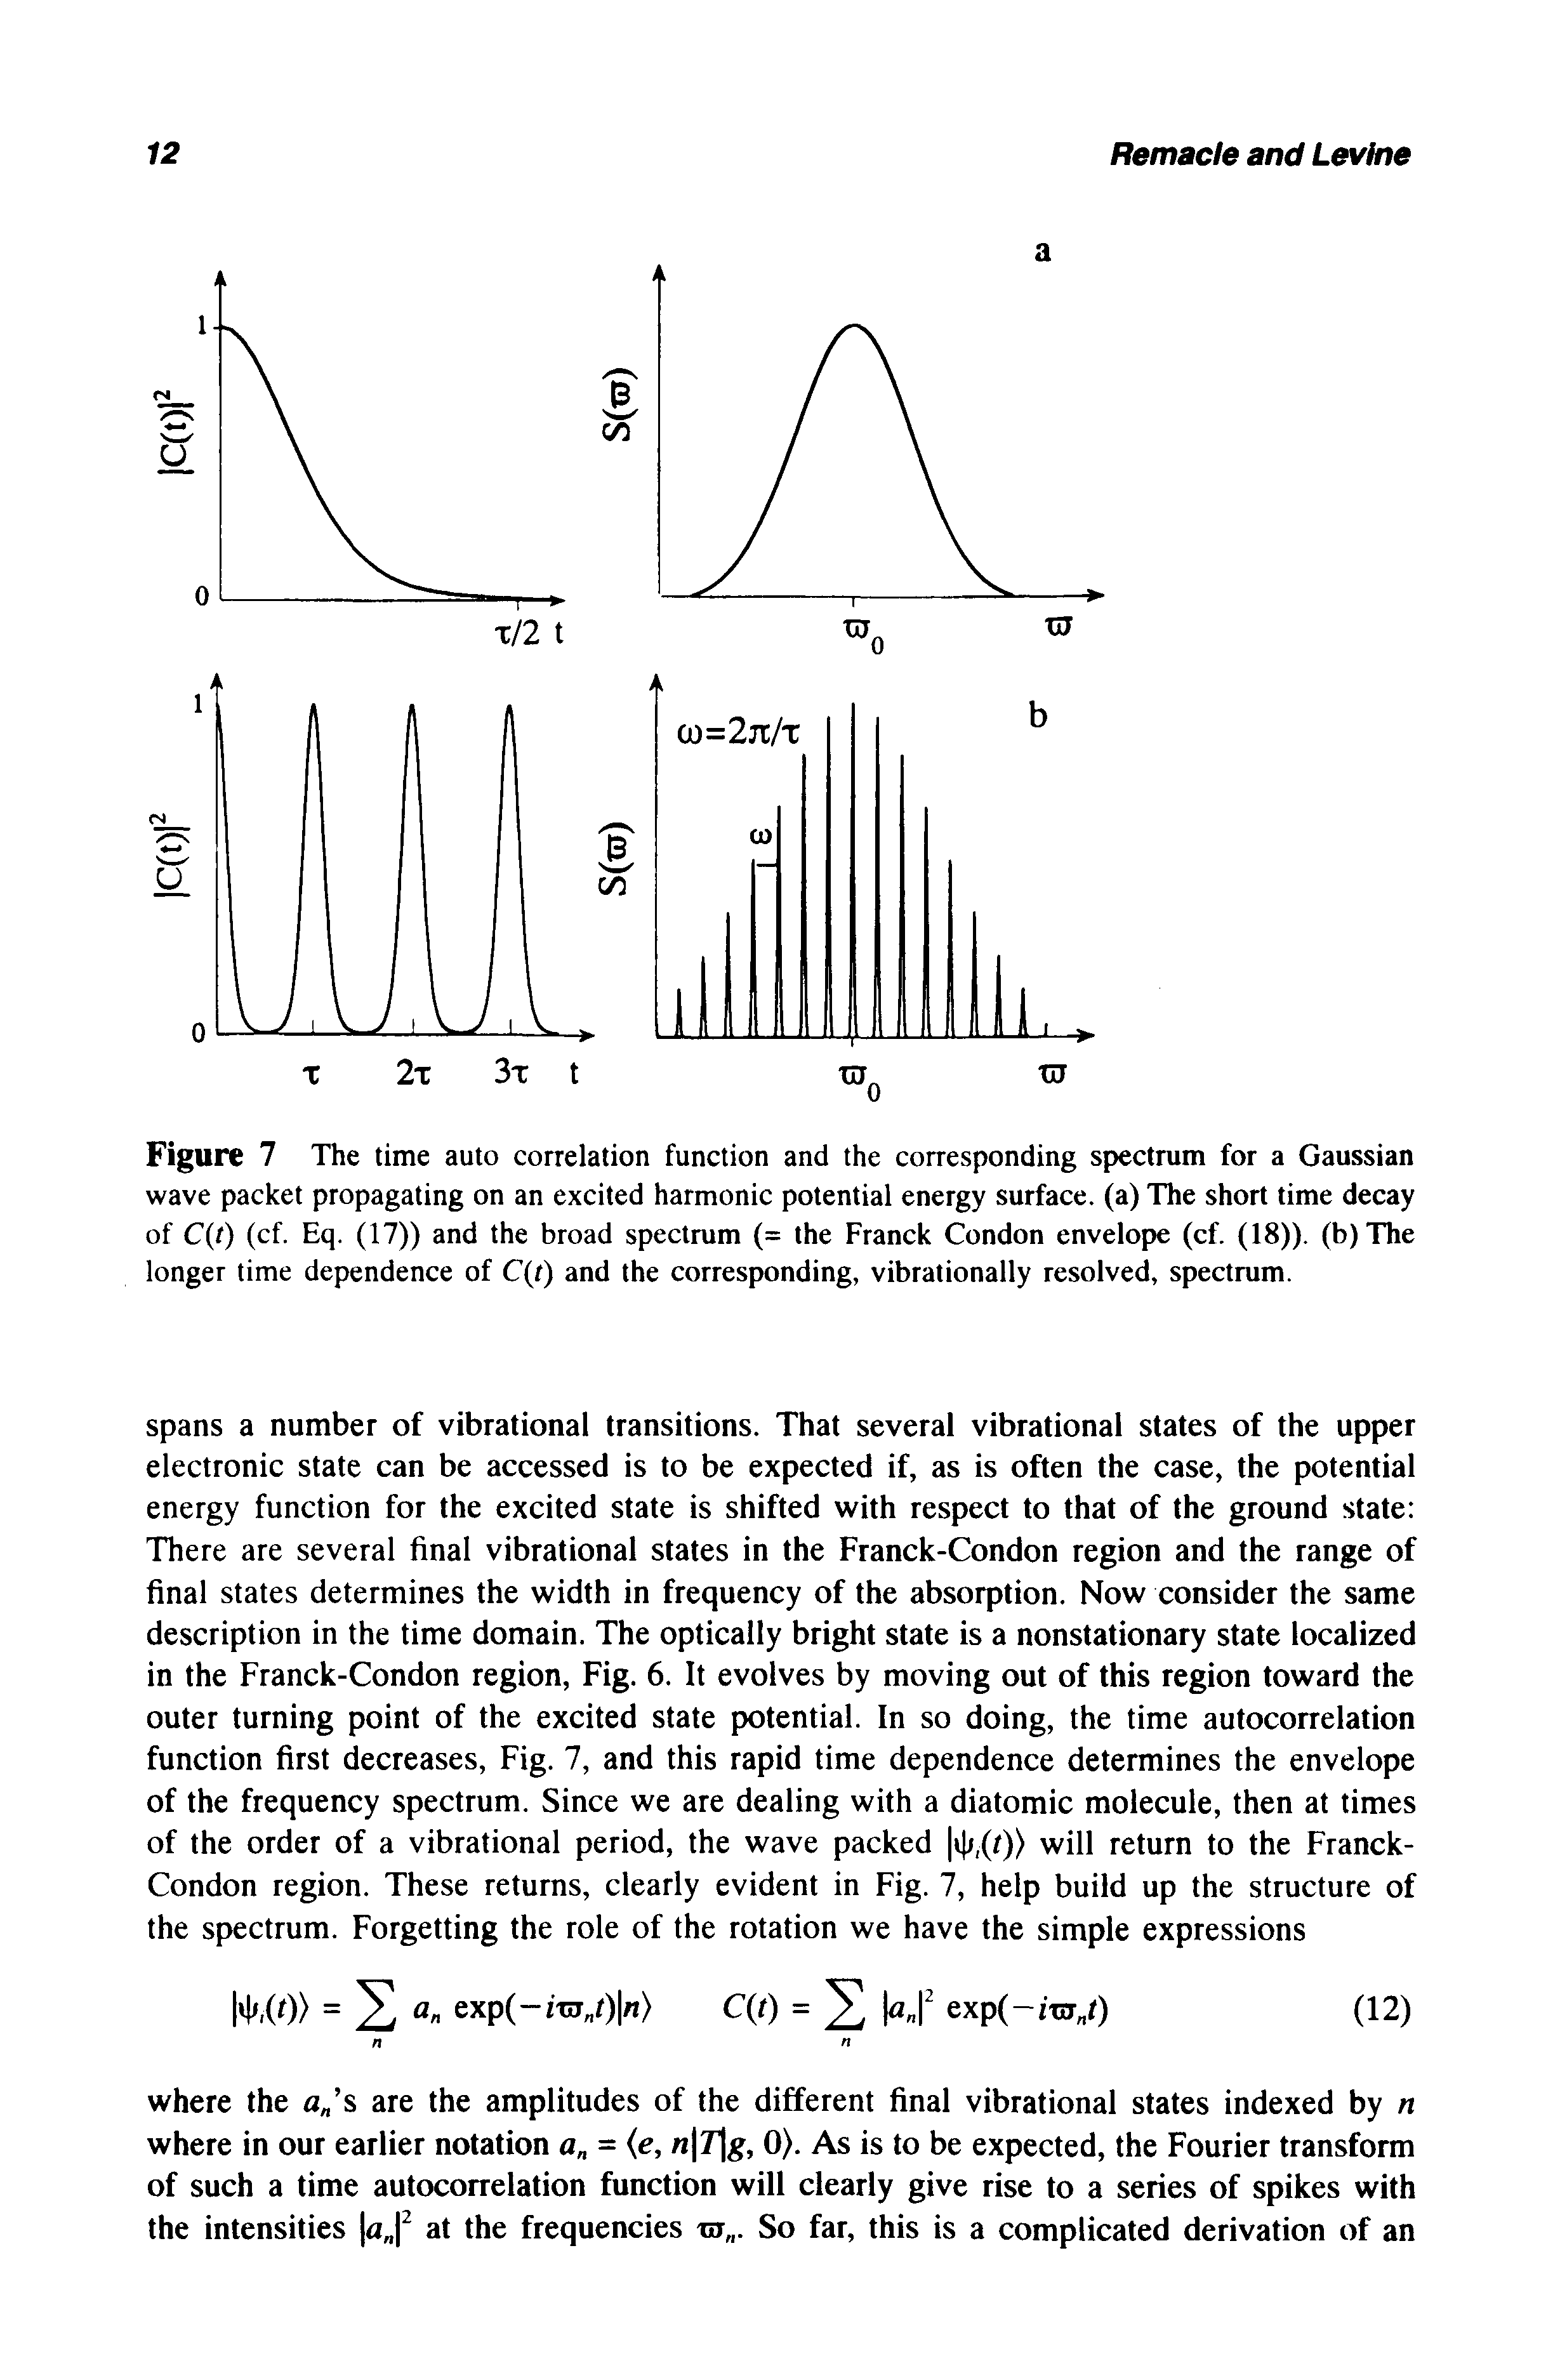 Figure 7 The time auto correlation function and the corresponding spectrum for a Gaussian wave packet propagating on an excited harmonic potential energy surface, (a) The short time decay of C(/) (cf. Eq. (17)) and the broad spectrum (= the Franck Condon envelope (cf. (18)). (b)The longer time dependence of C(r) and the corresponding, vibrationally resolved, spectrum.